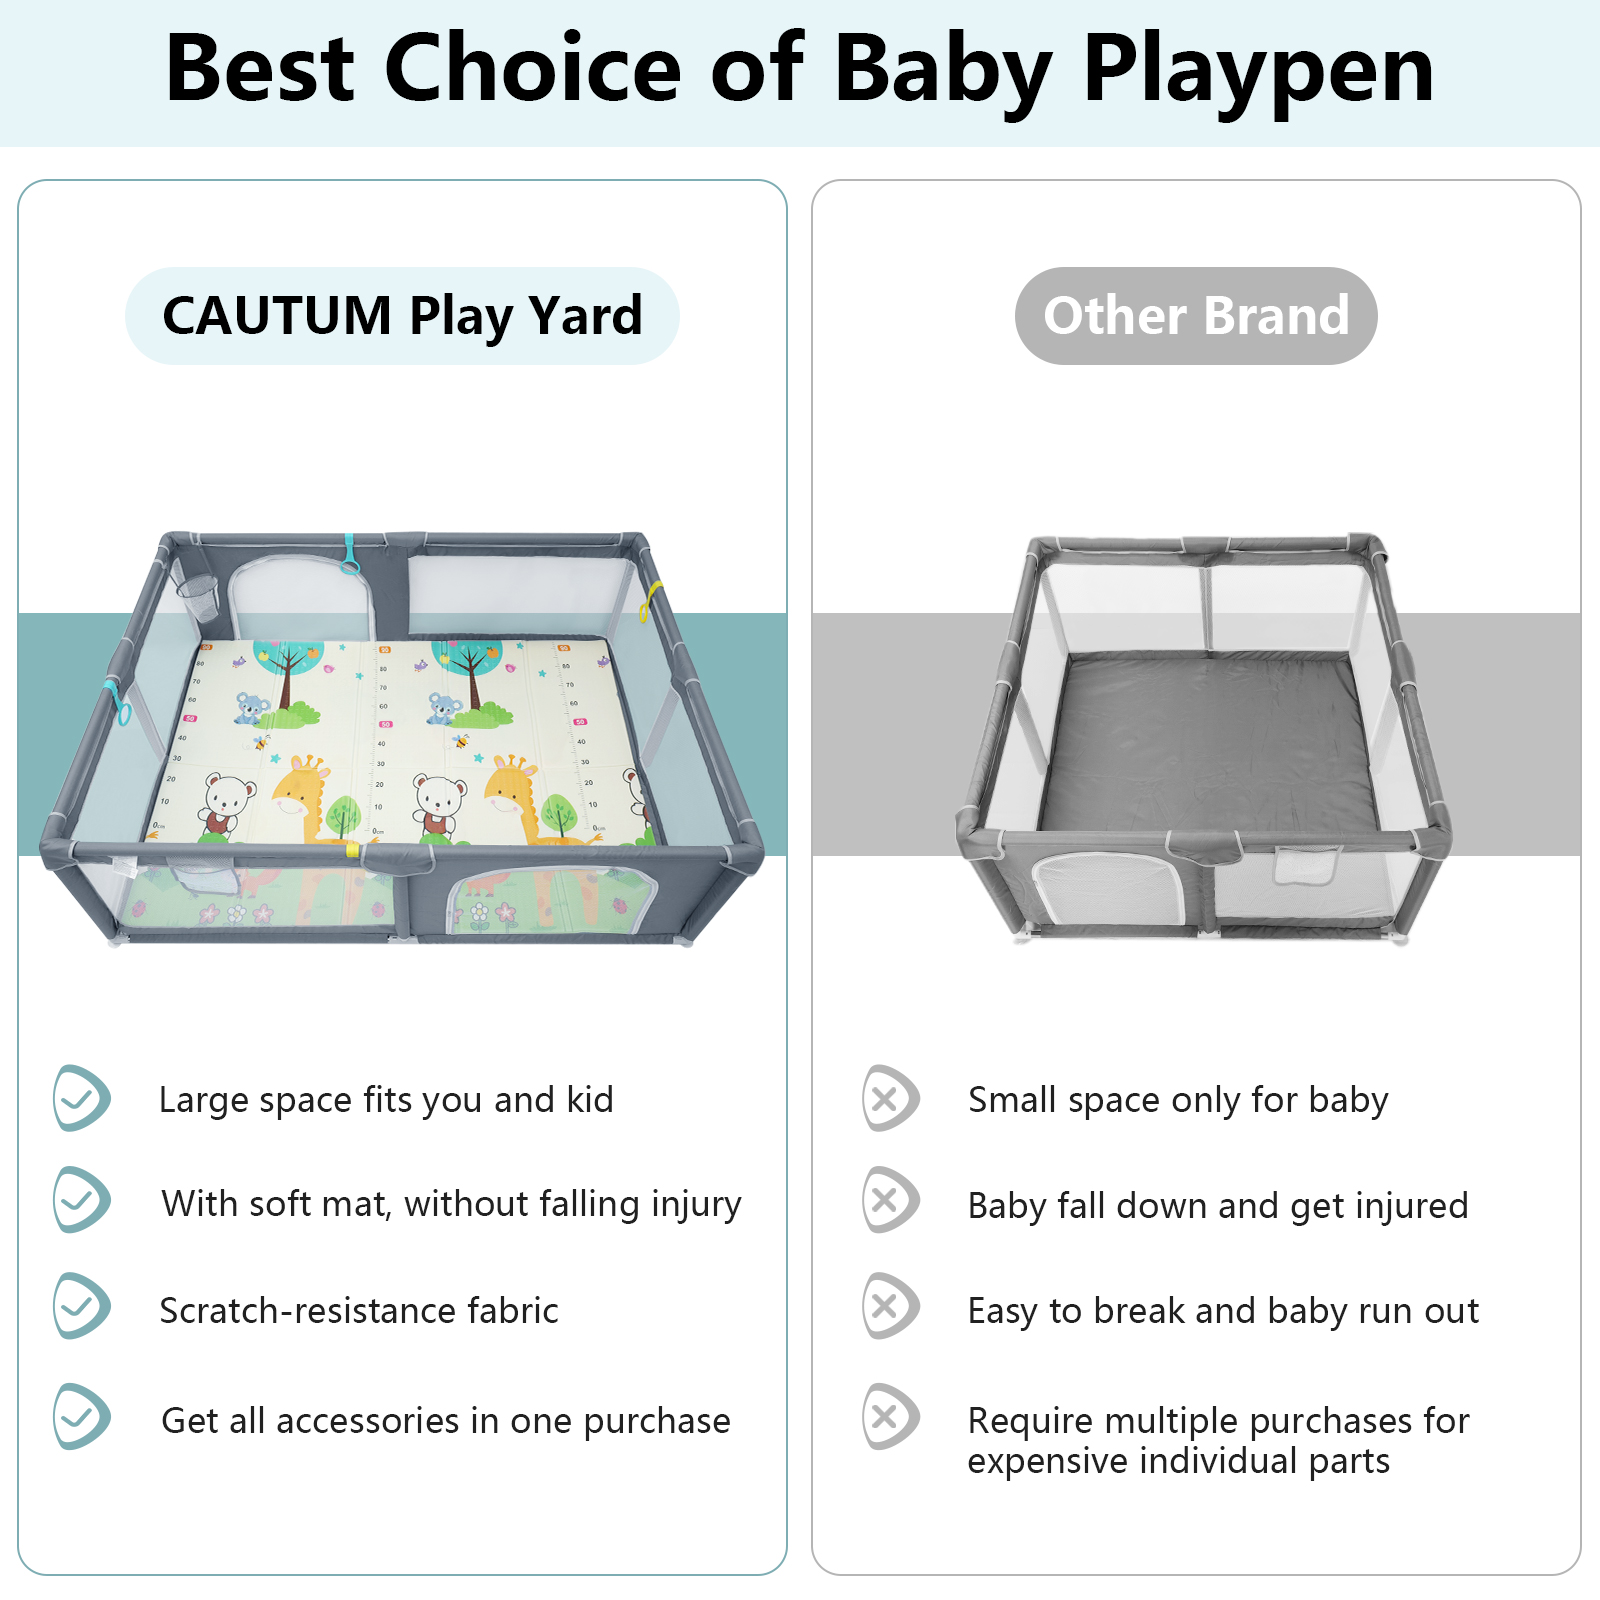 CAUTUM Large Baby Playpen for Toddler, Indoor & Outdoor, 78"x59"x26" with 0.4" Playmat Gray - image 5 of 9